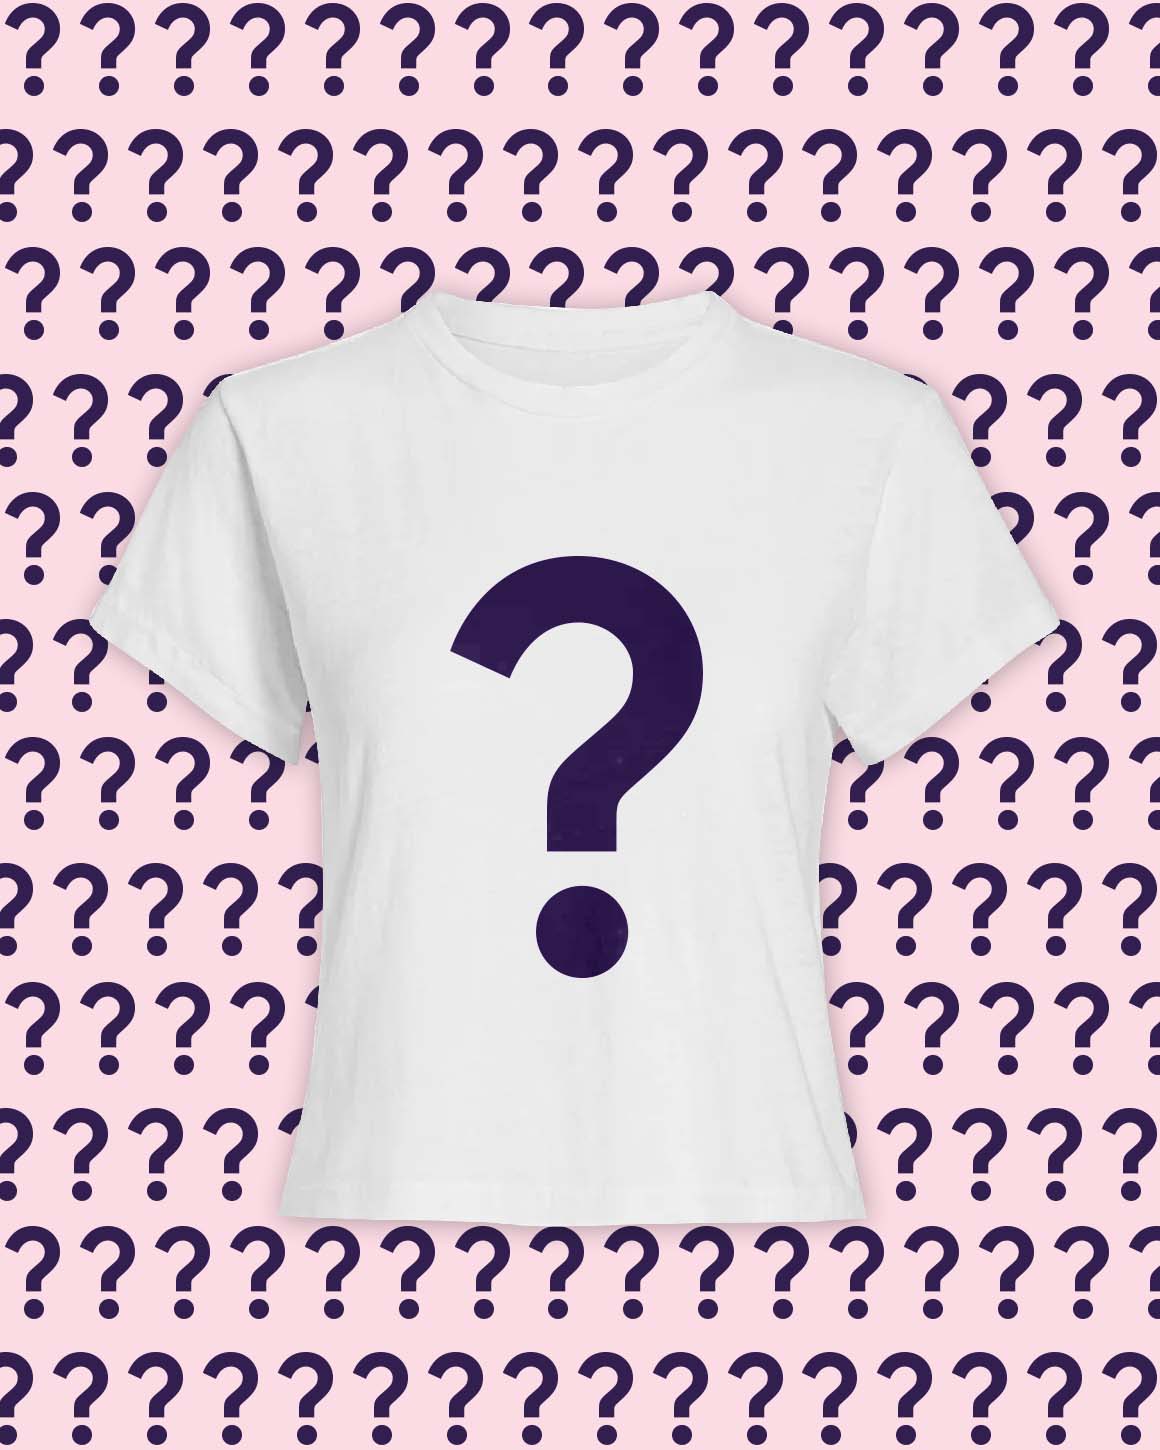 Mystery feminist shirt for treating yourself to a surprise